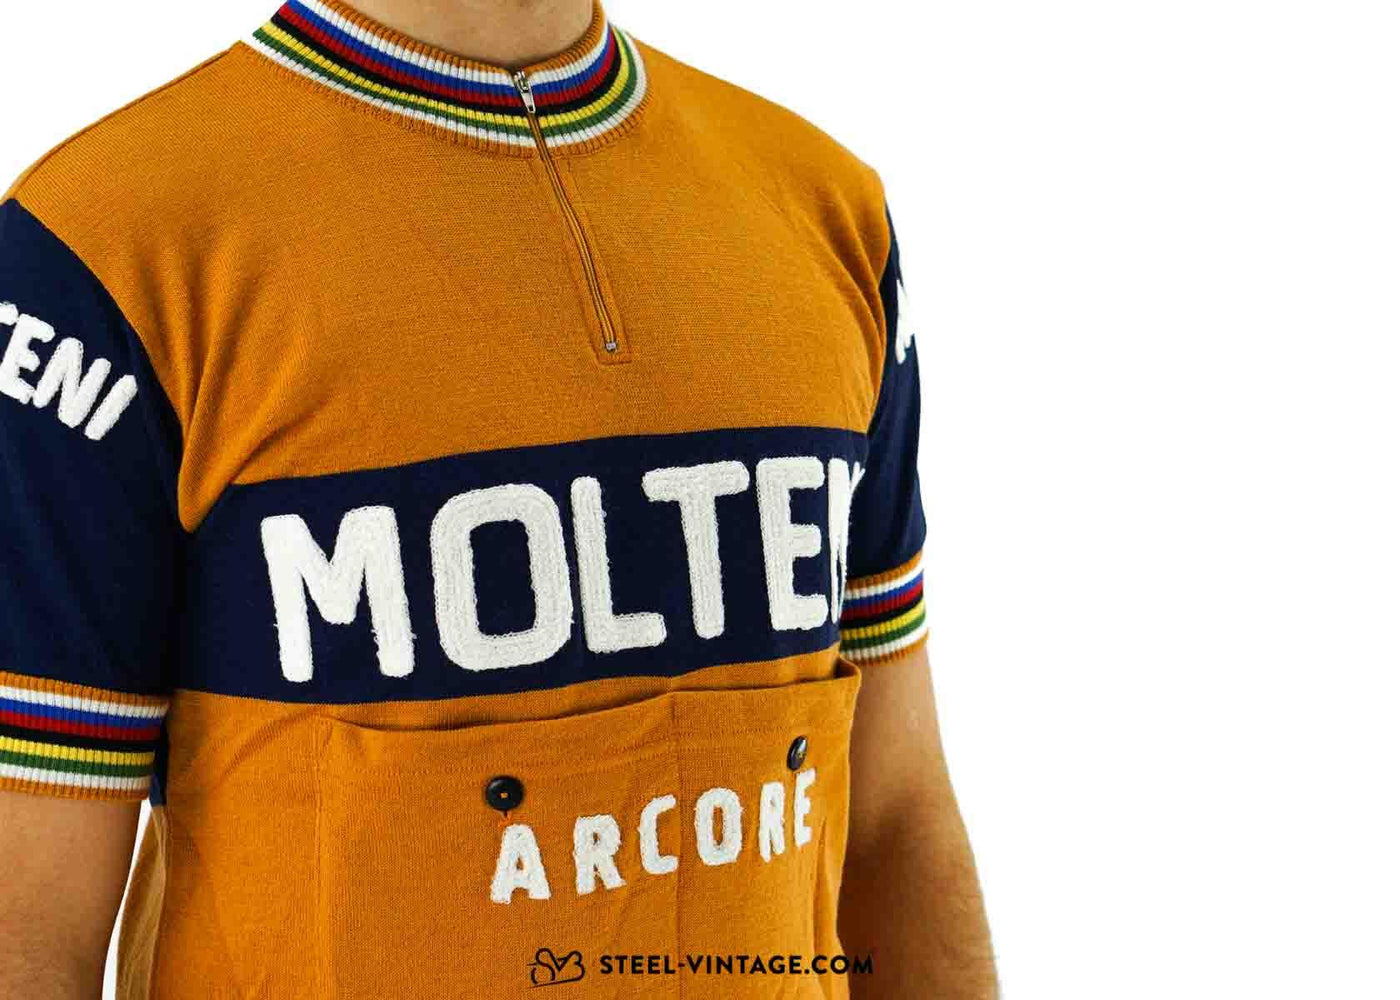 Vintage Wool Shorts 100% Merino Wool and Leather – MOLTENI CYCLING